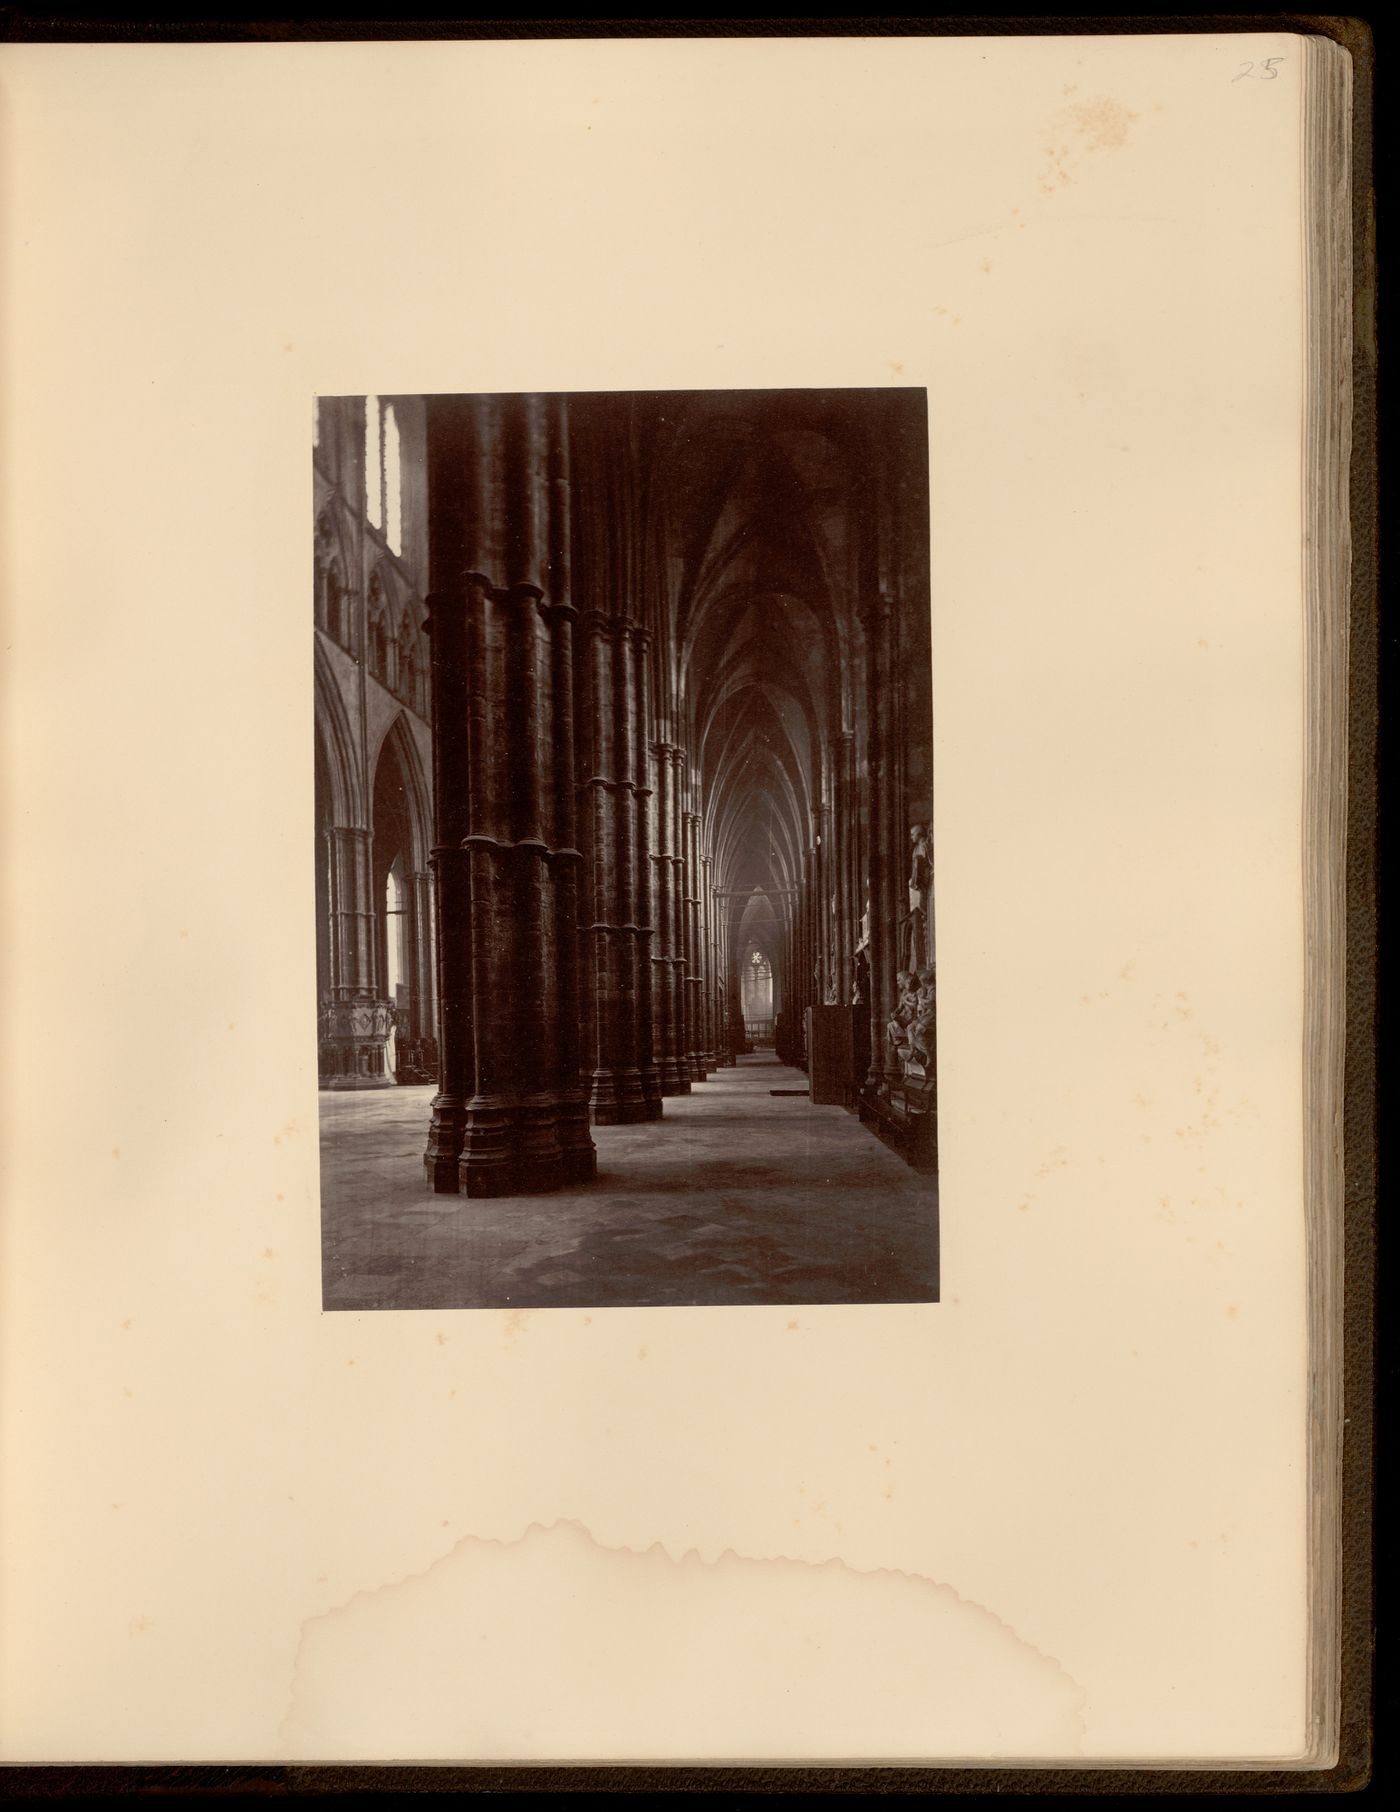 Plate from book ''The Abbey and Palace of Westminster''